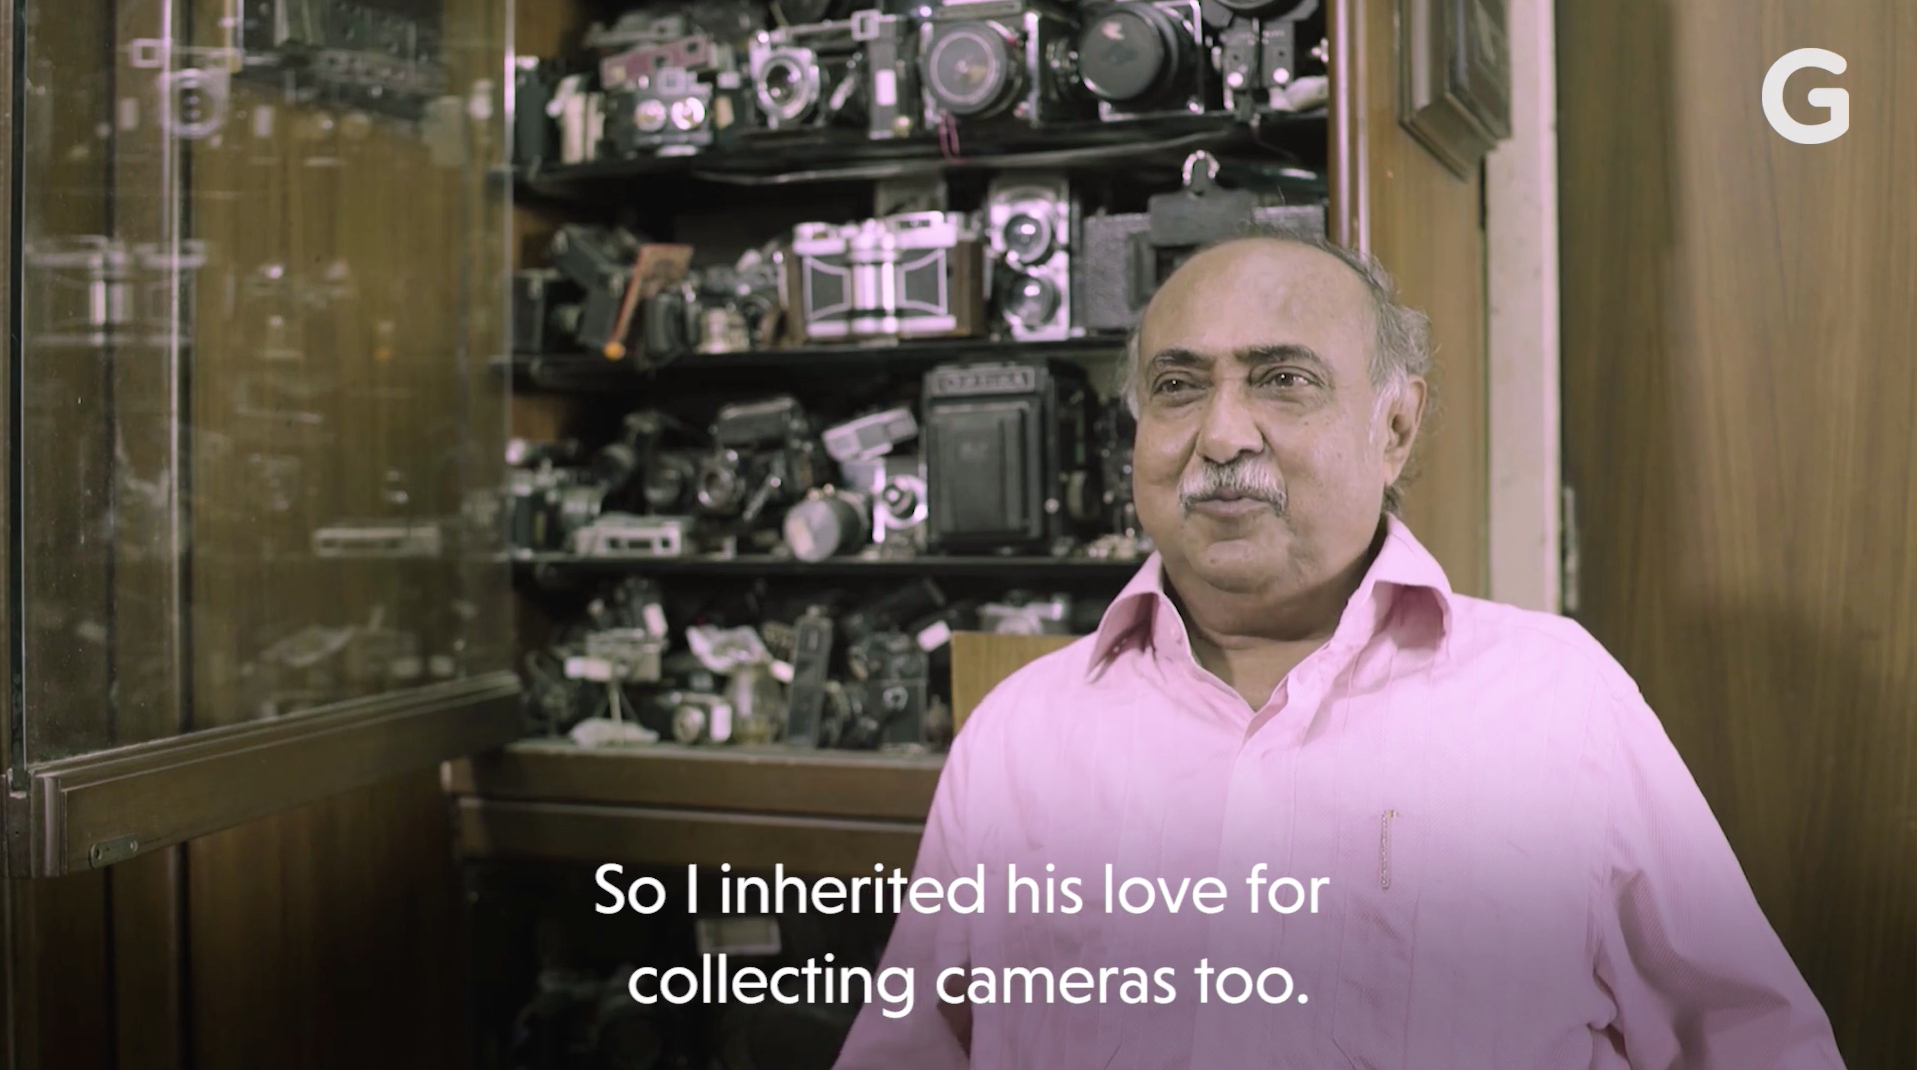 Dilish Parekh of Mumbai, India, speaks to Gizmodo about his collection of cameras.